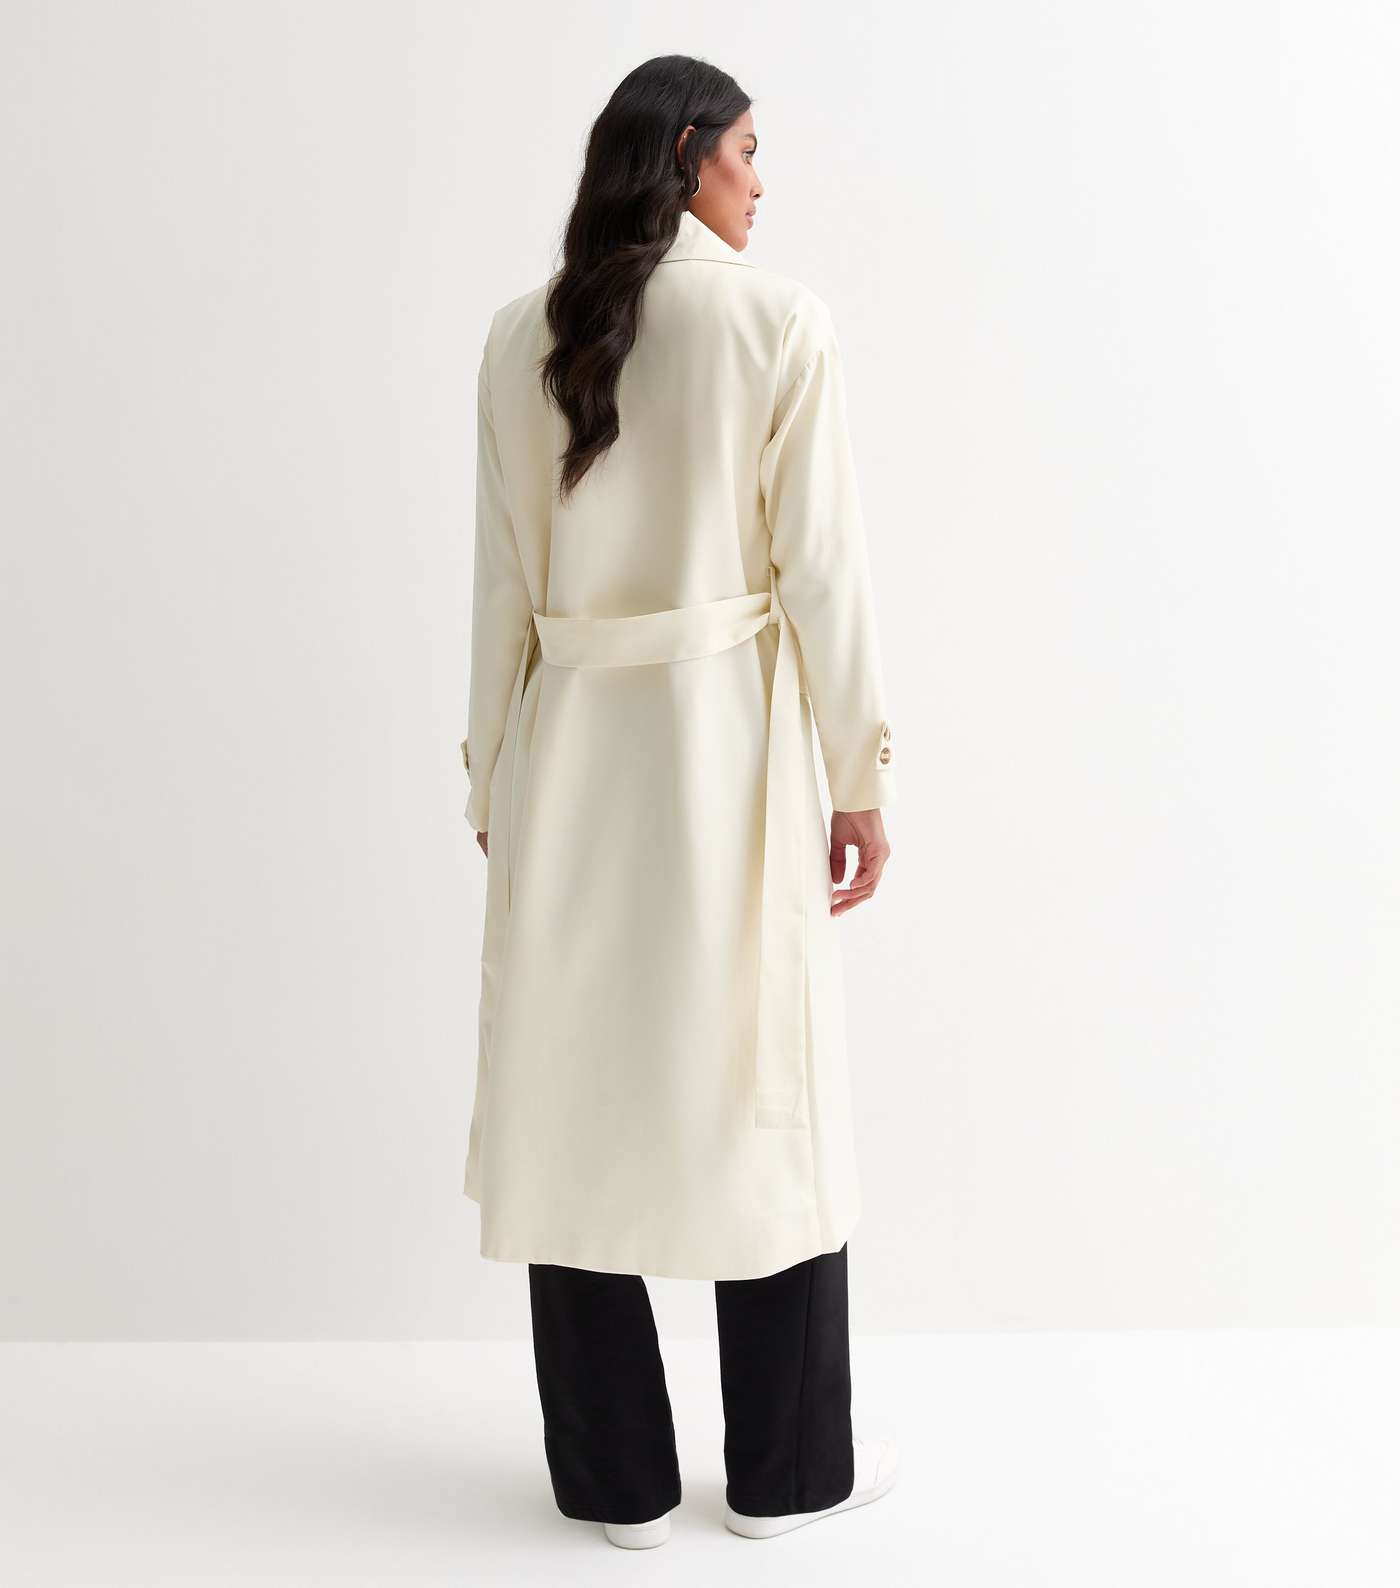 Gini London Cream Belted Longline Trench Coat Image 4